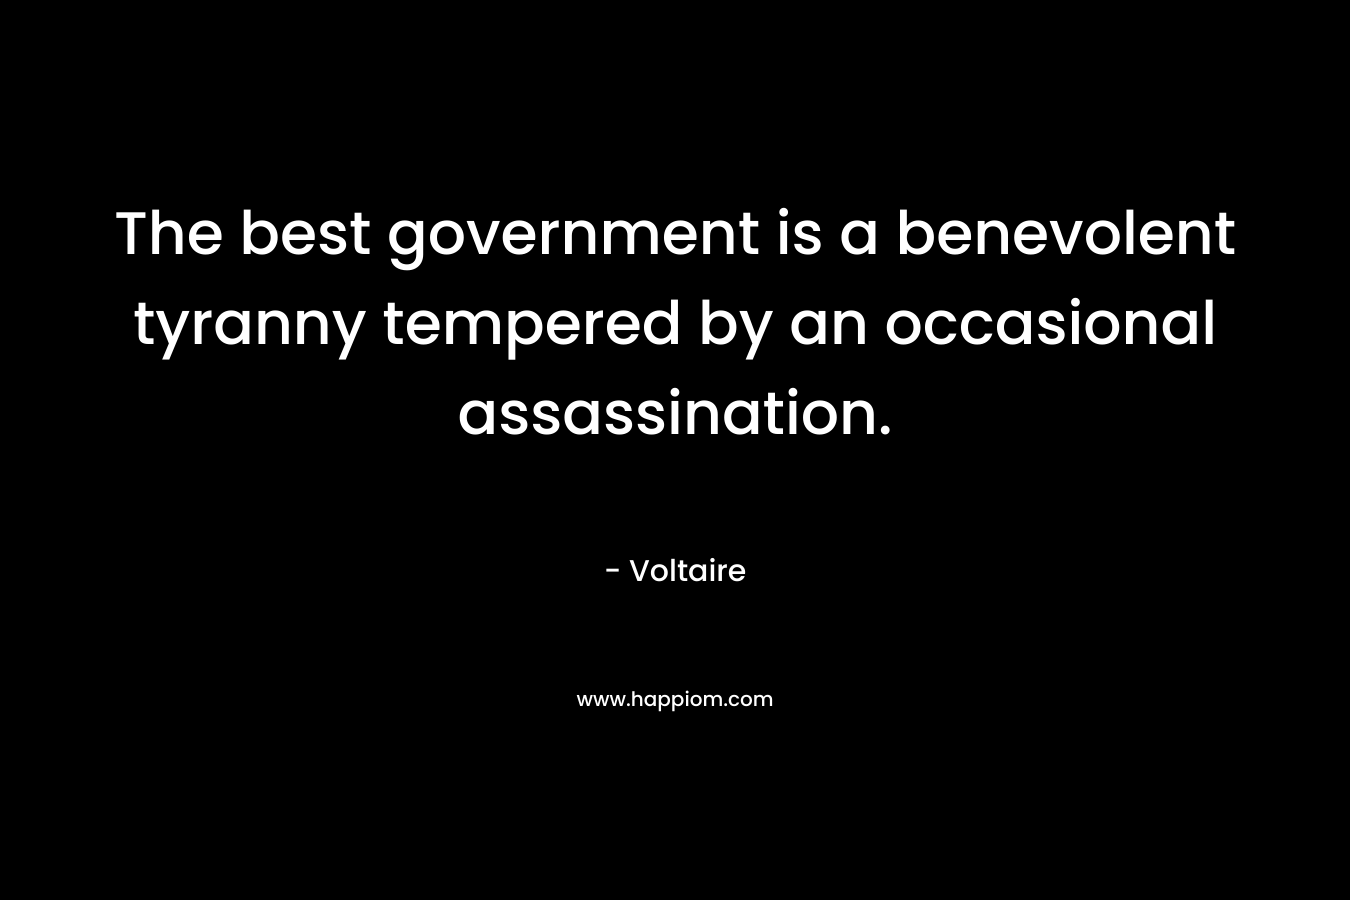 The best government is a benevolent tyranny tempered by an occasional assassination. – Voltaire